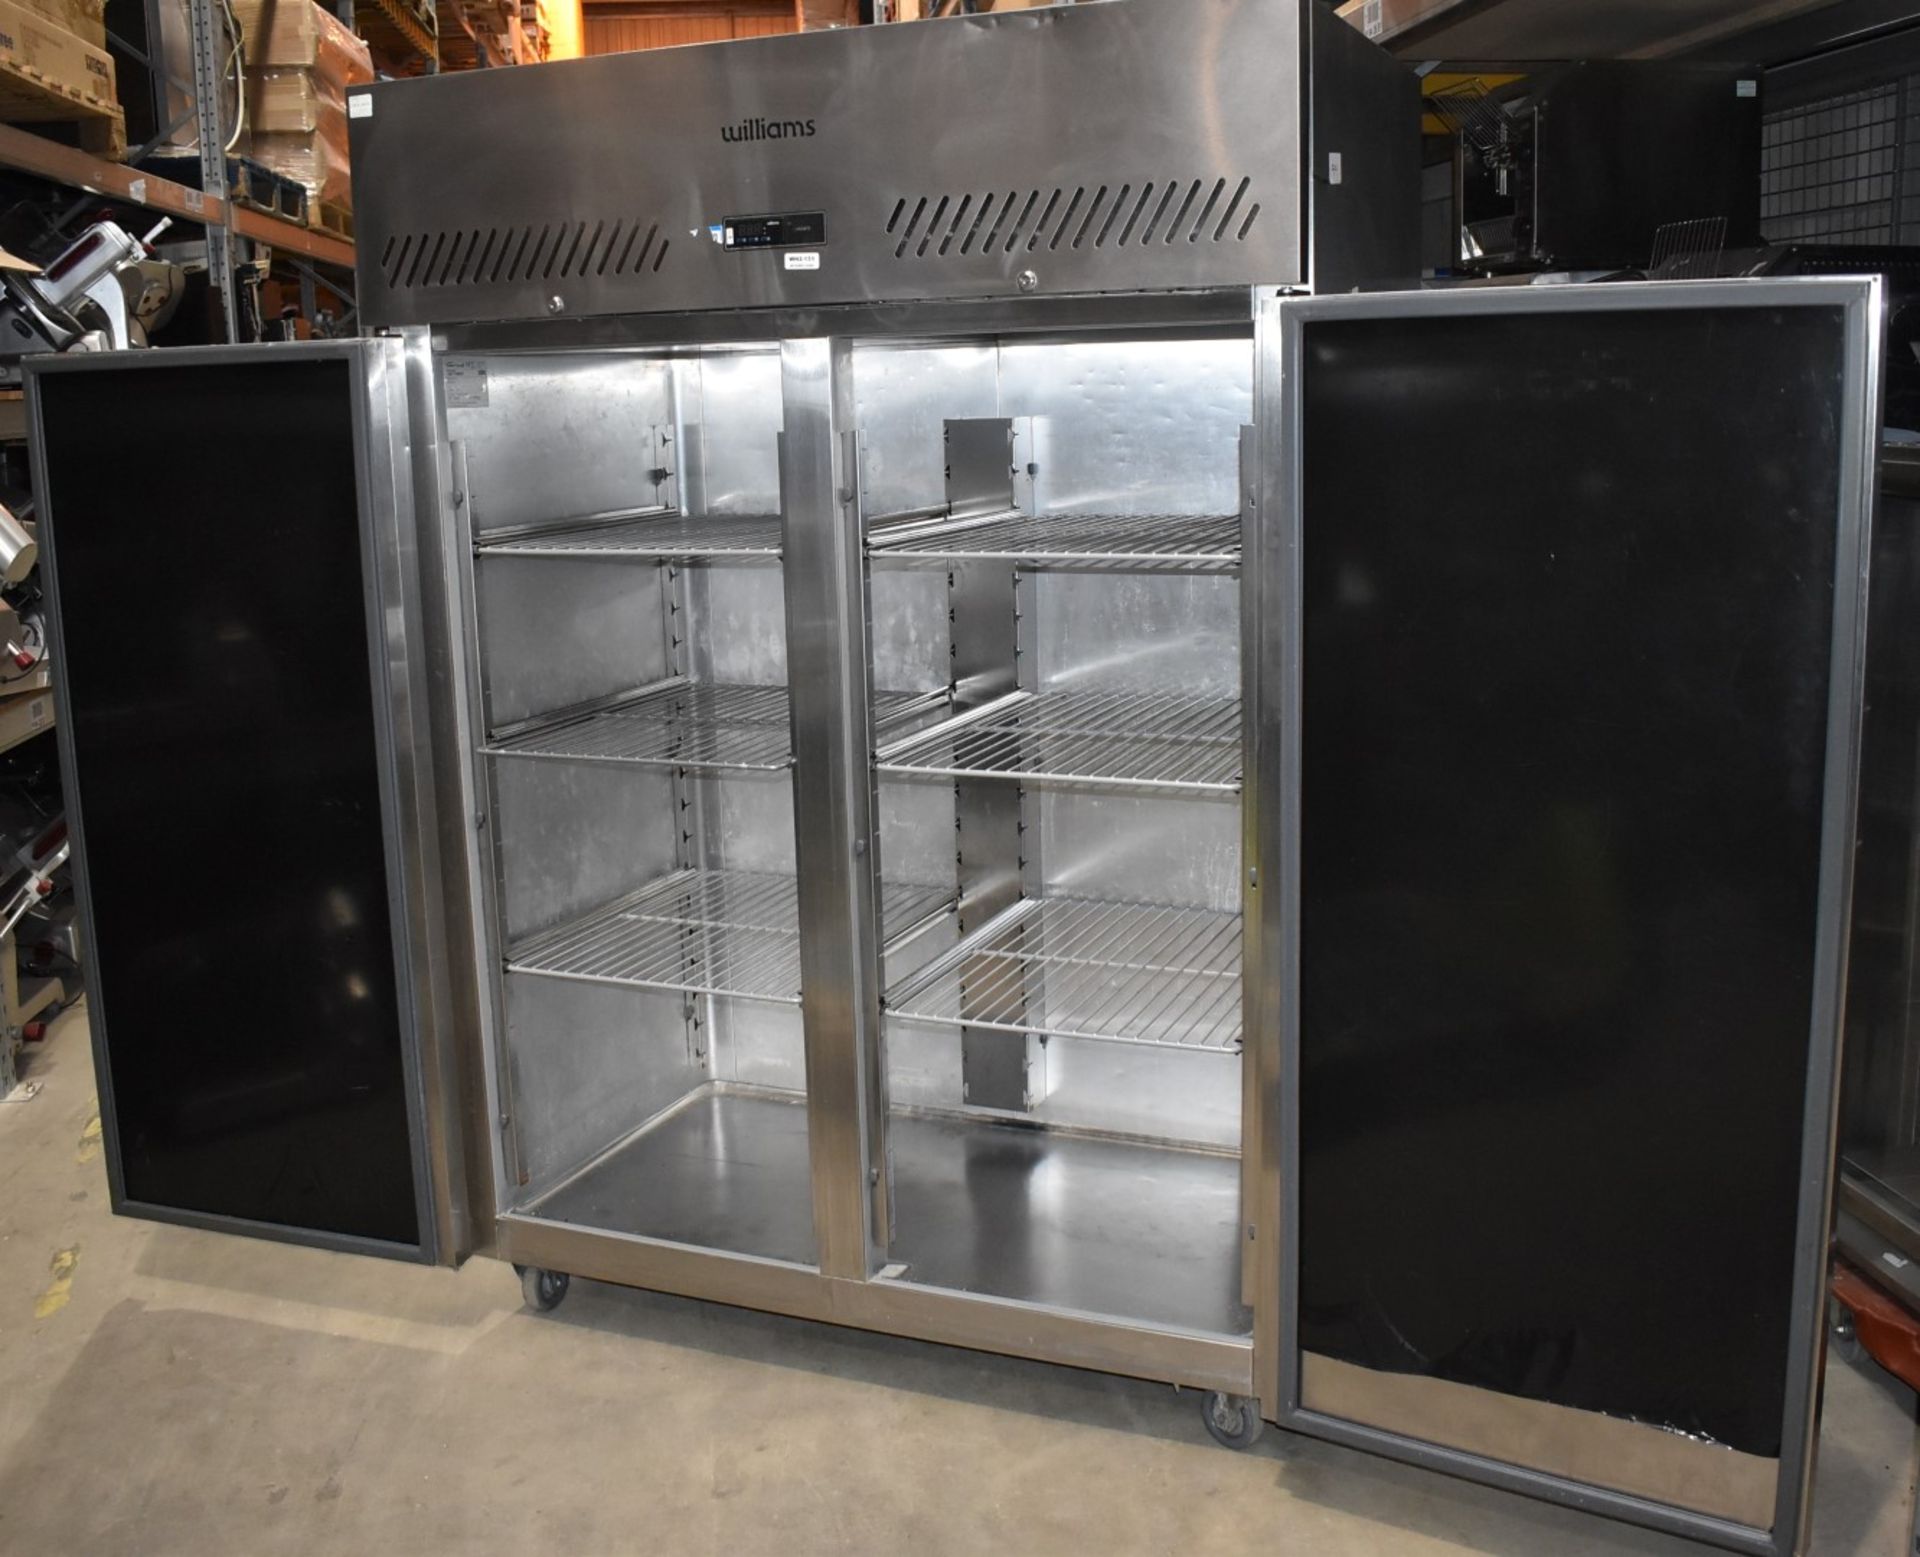 1 x Williams Upright Double Door Refrigerator With Stainless Steel Exterior - Model HS2SA - Recently - Image 3 of 20